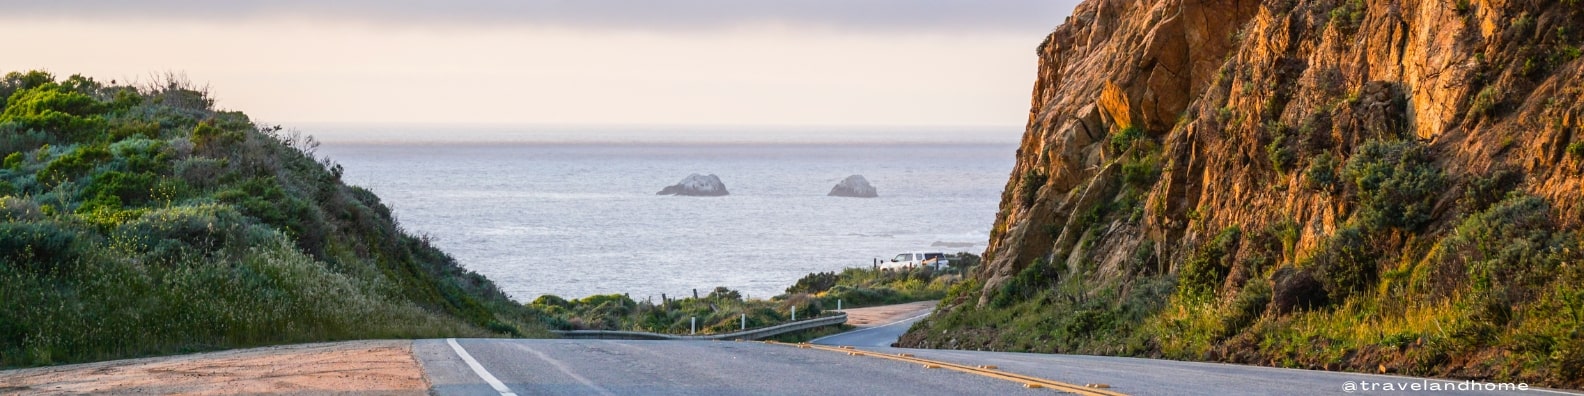 Most scenic San Francisco road trips pacific coast highway California USA travel and home min